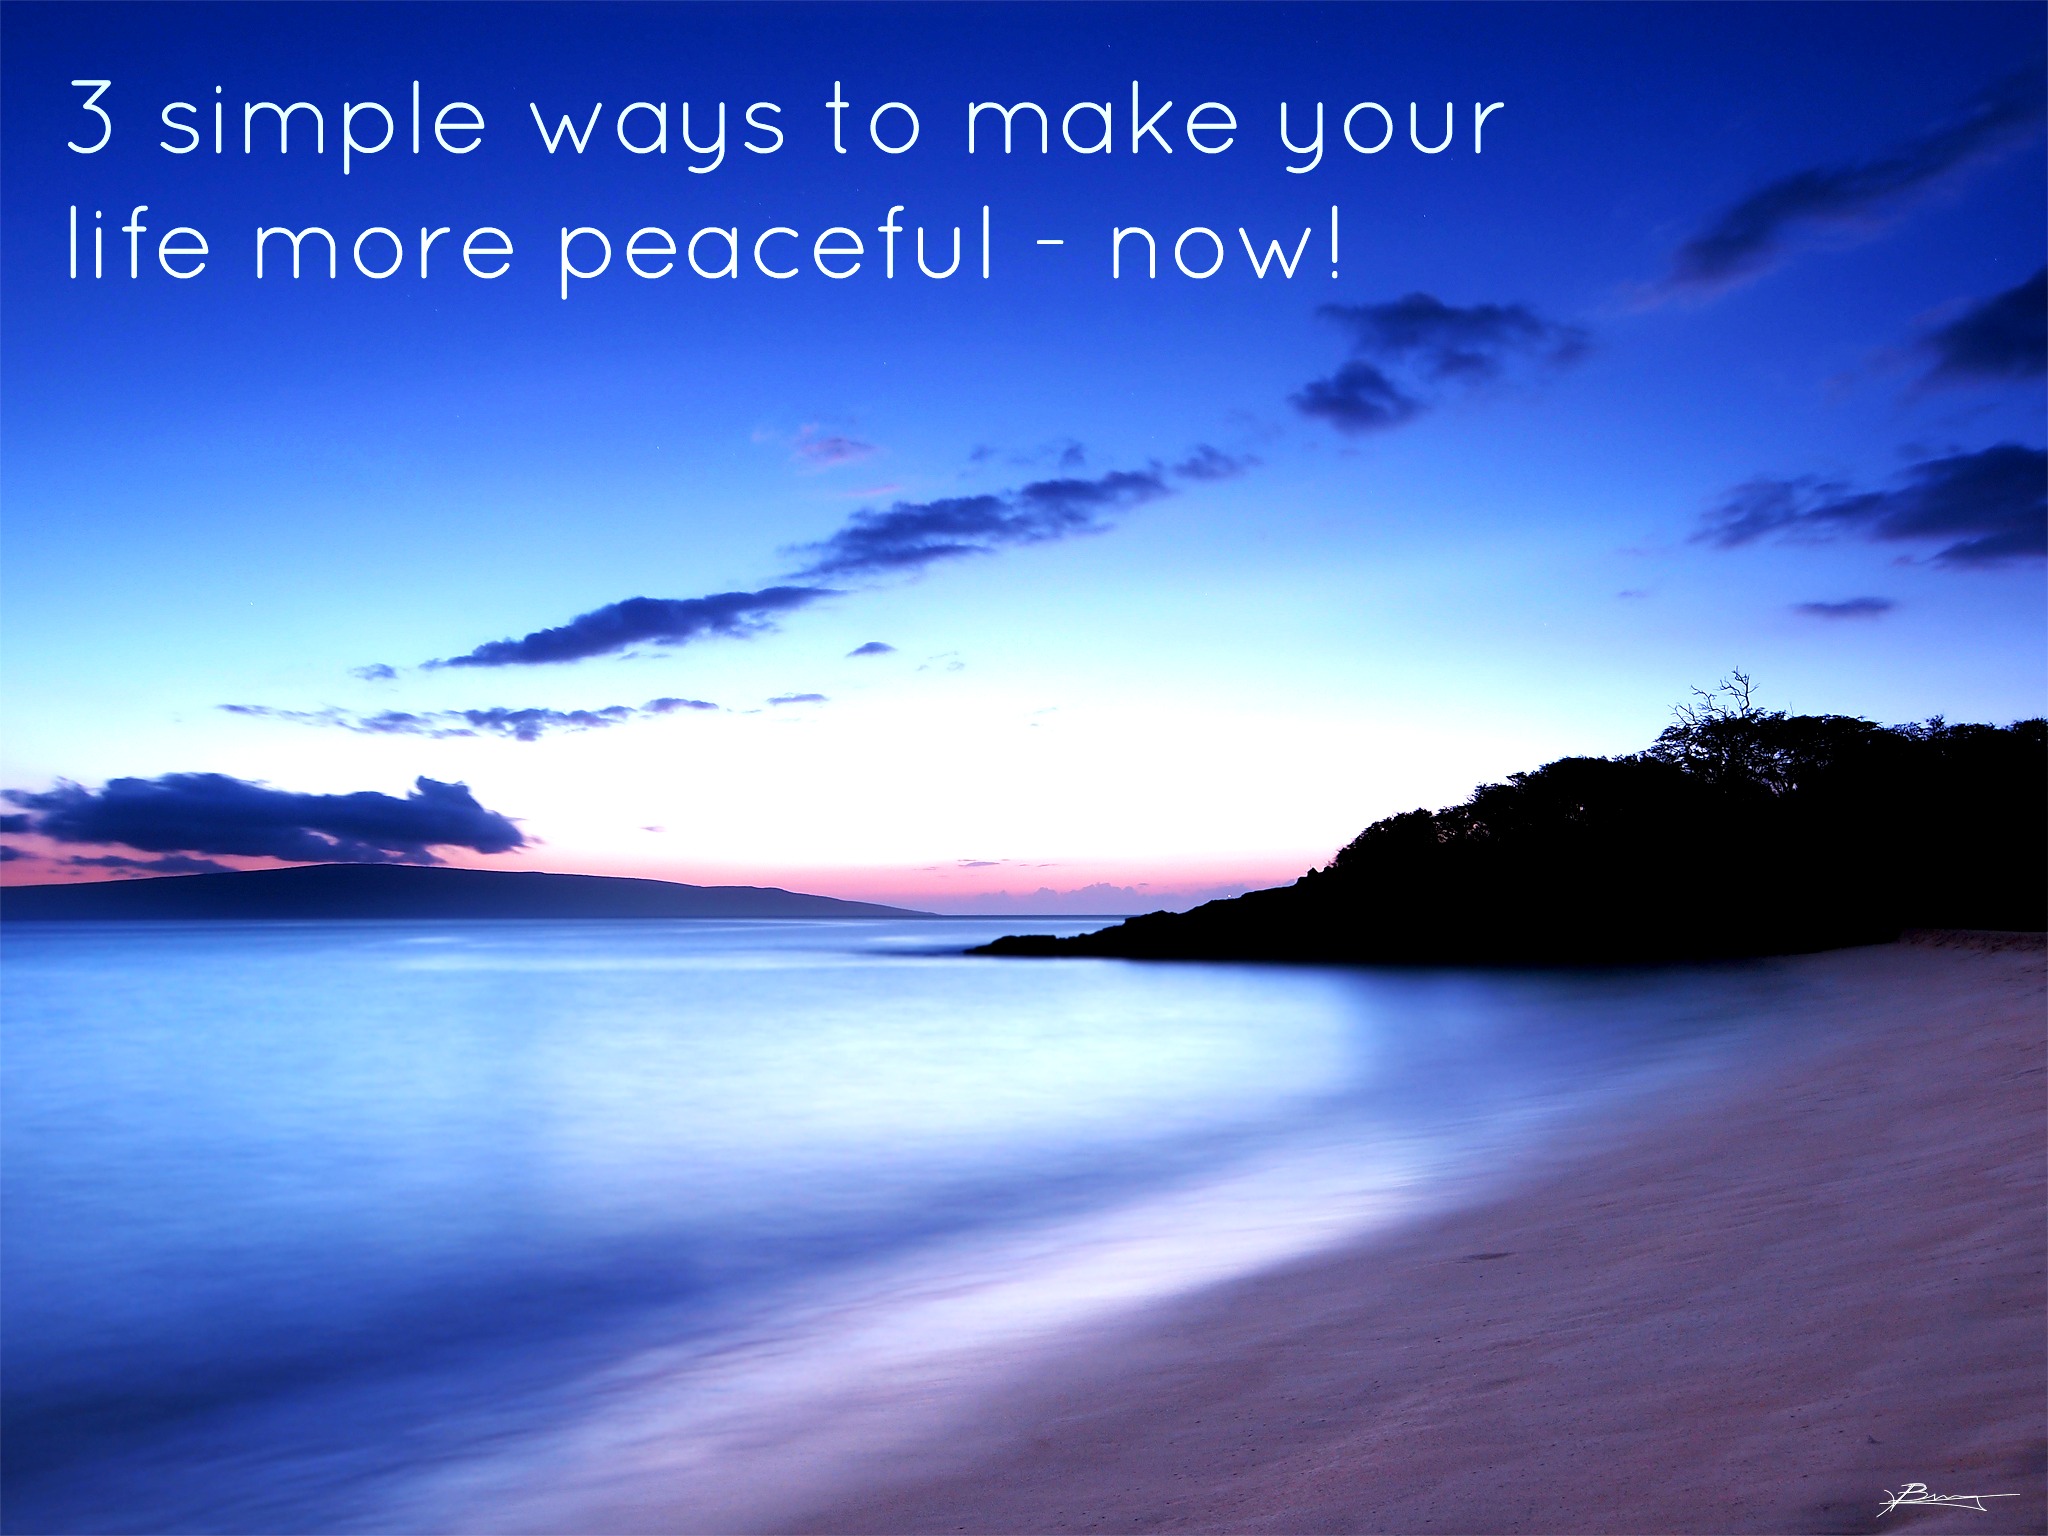 3 simple ways to make your life more peaceful – now!